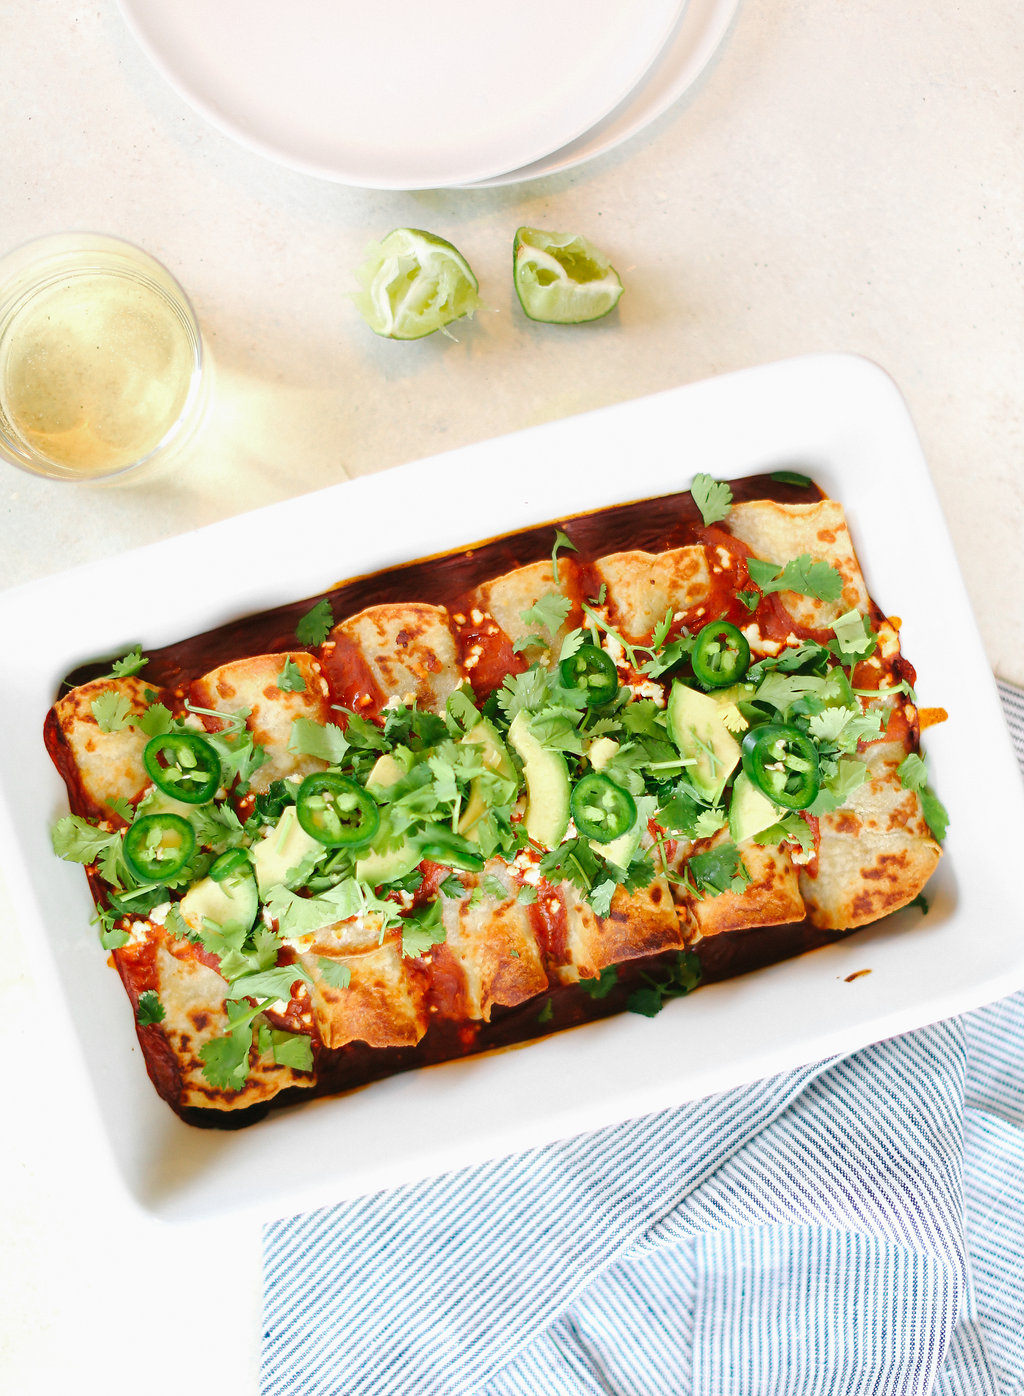 These Goat Cheese Enchiladas are easy to make, can feed an army and are great for leftovers.